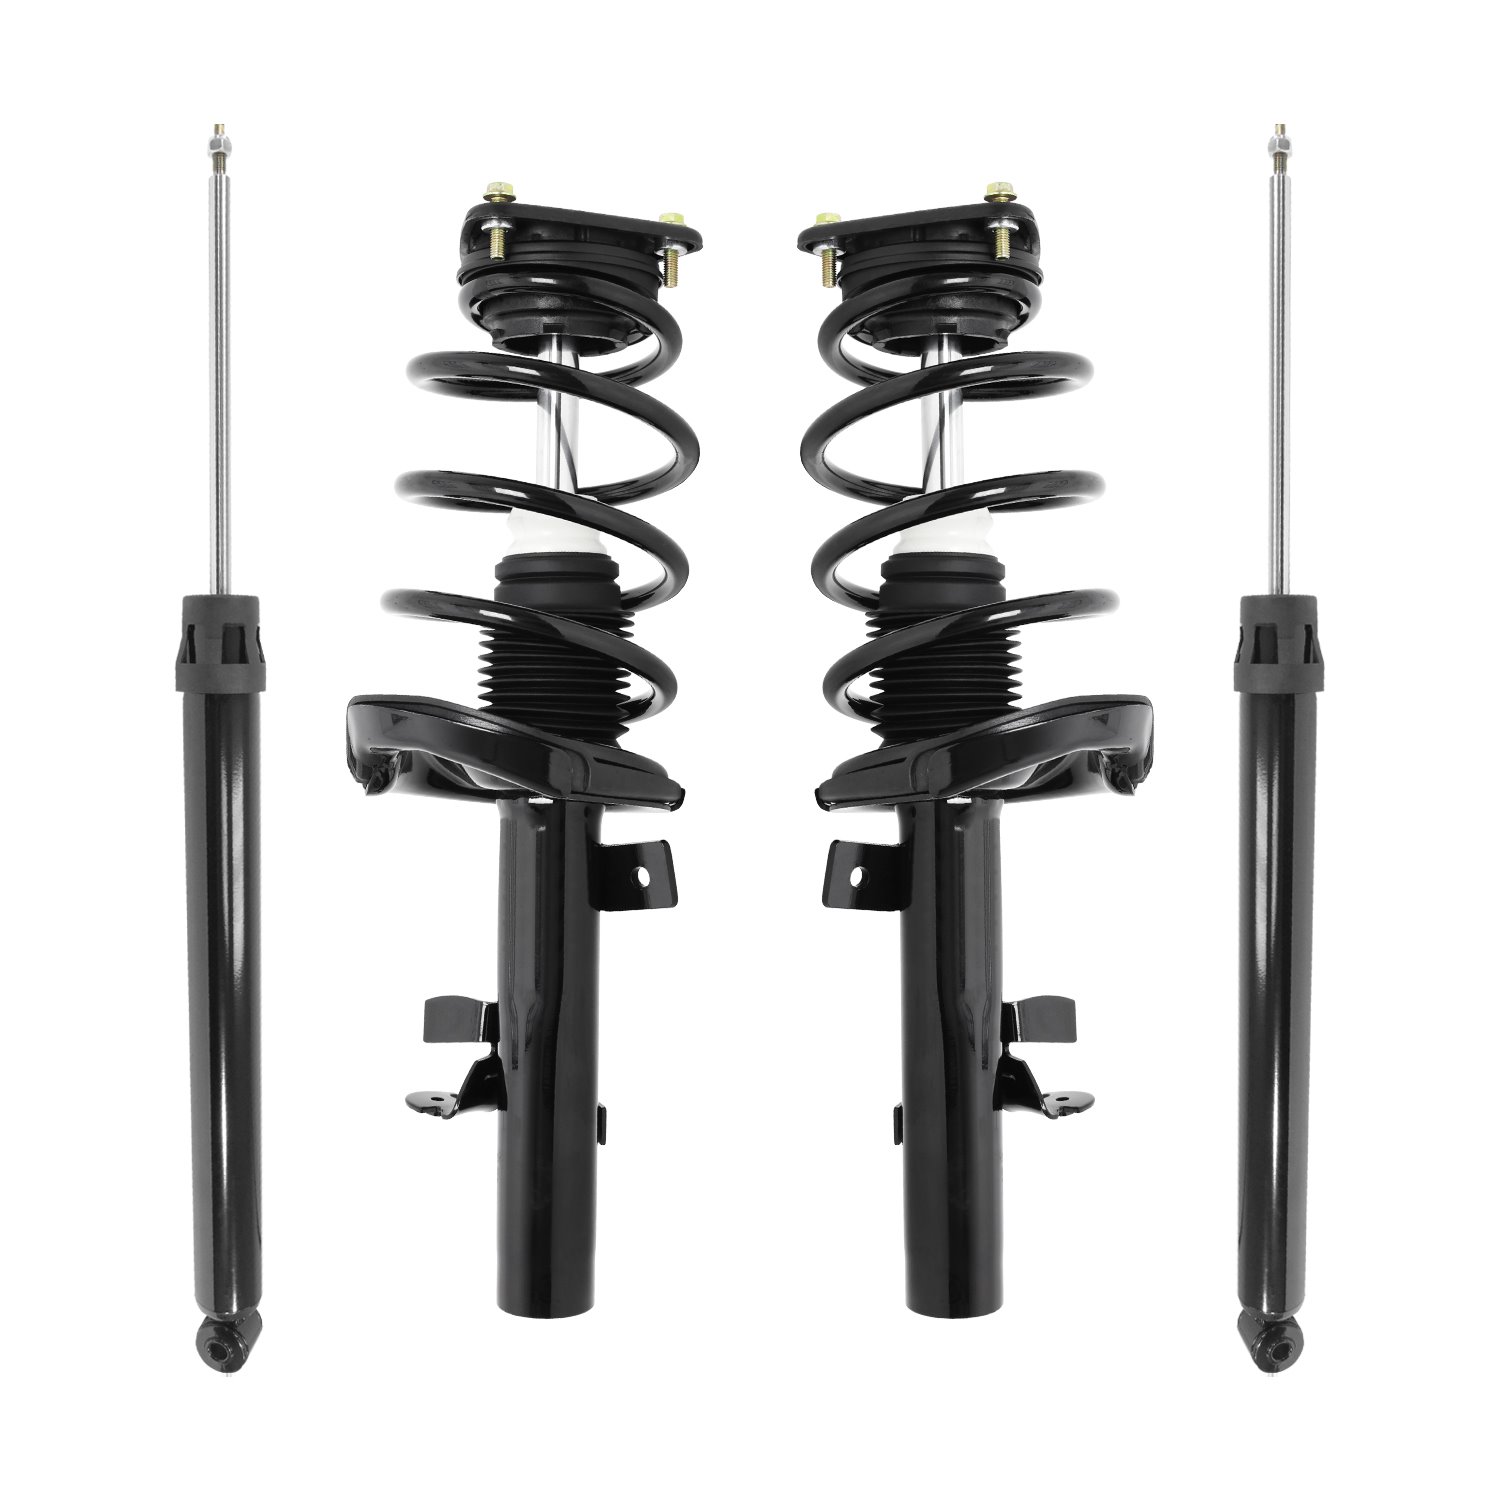 4-11085-252150-001 Front & Rear Suspension Strut & Coil Spring Assembly Fits Select Ford Focus